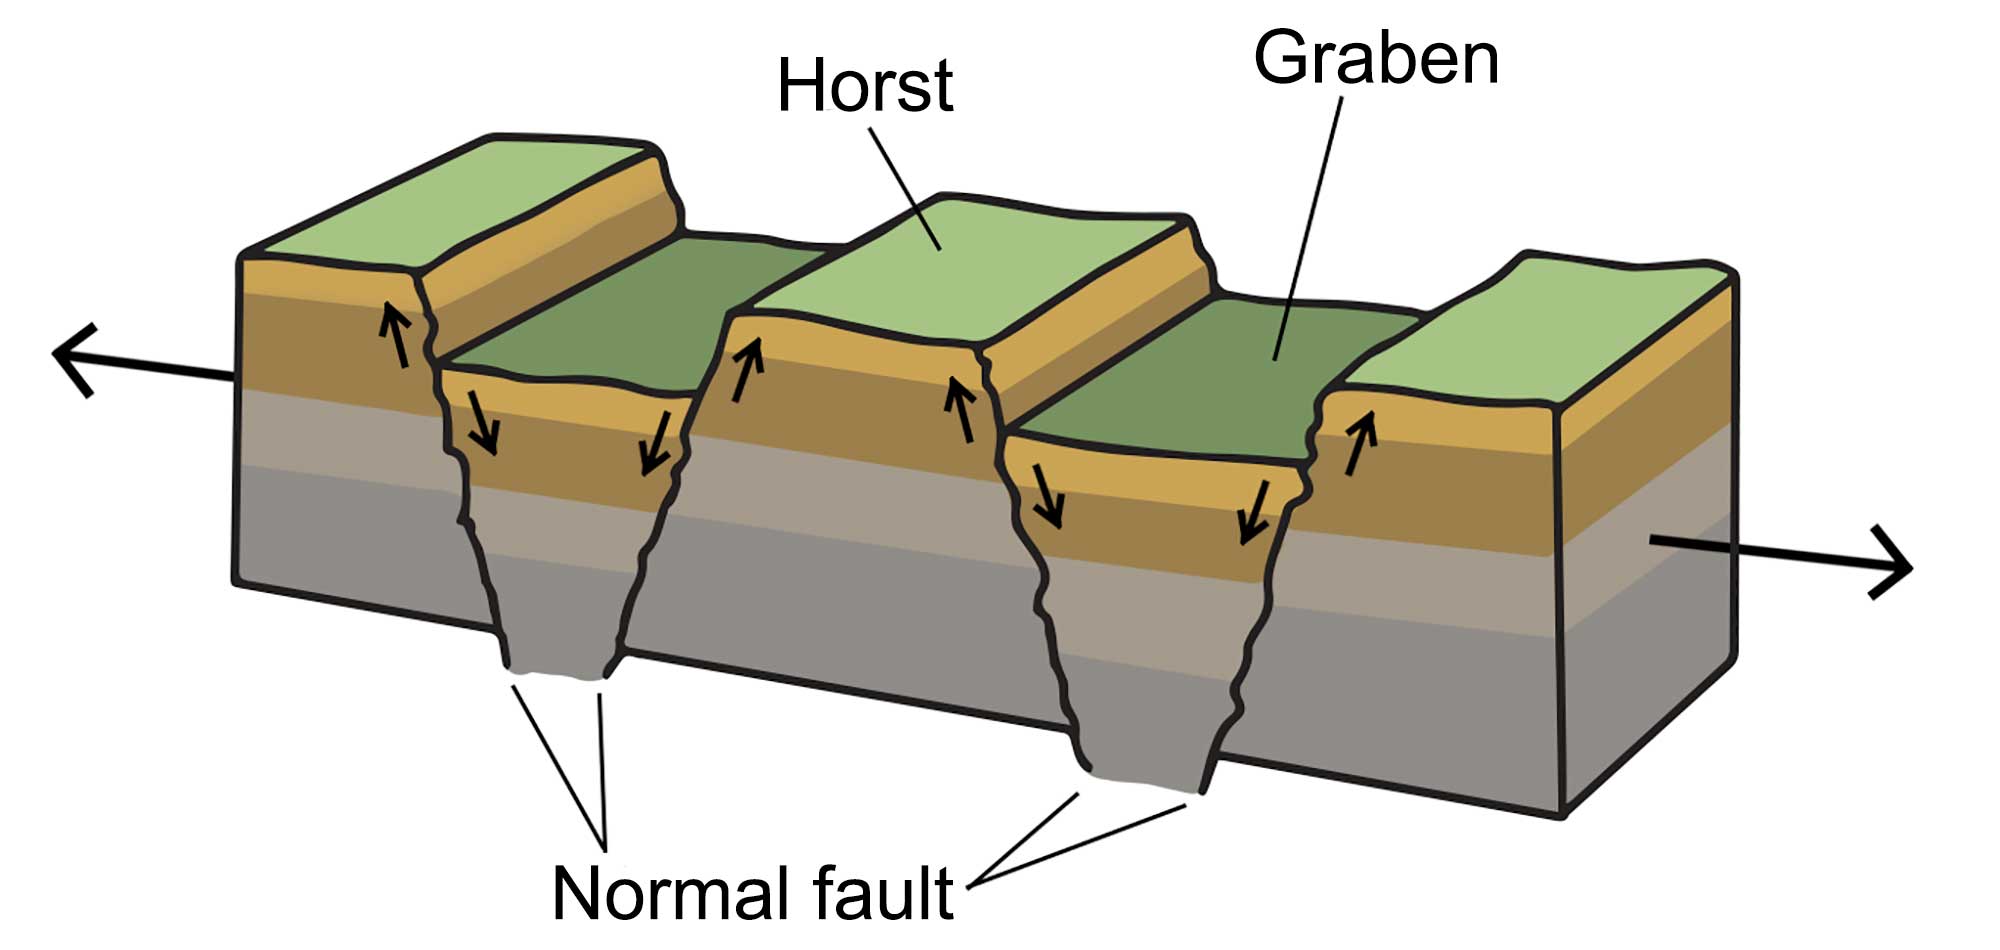 Illustration that shows how a horst and graben landscape forms when the crust stretches and faulting occurs.